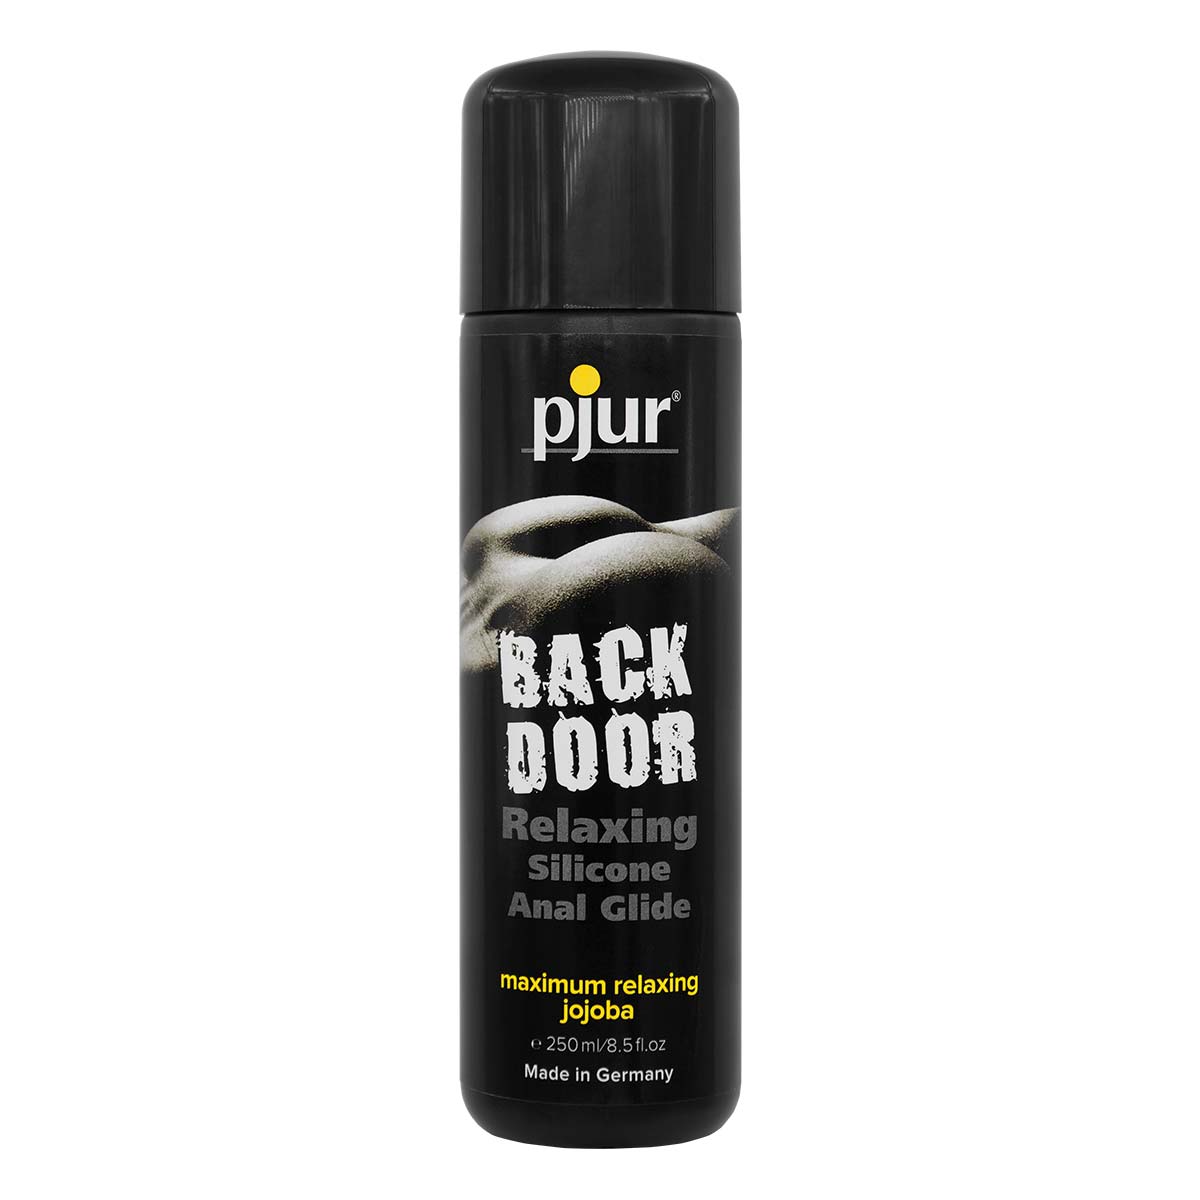 pjur BACK DOOR RELAXING Silicone Anal Glide 250ml Silicone-based Lubricant.